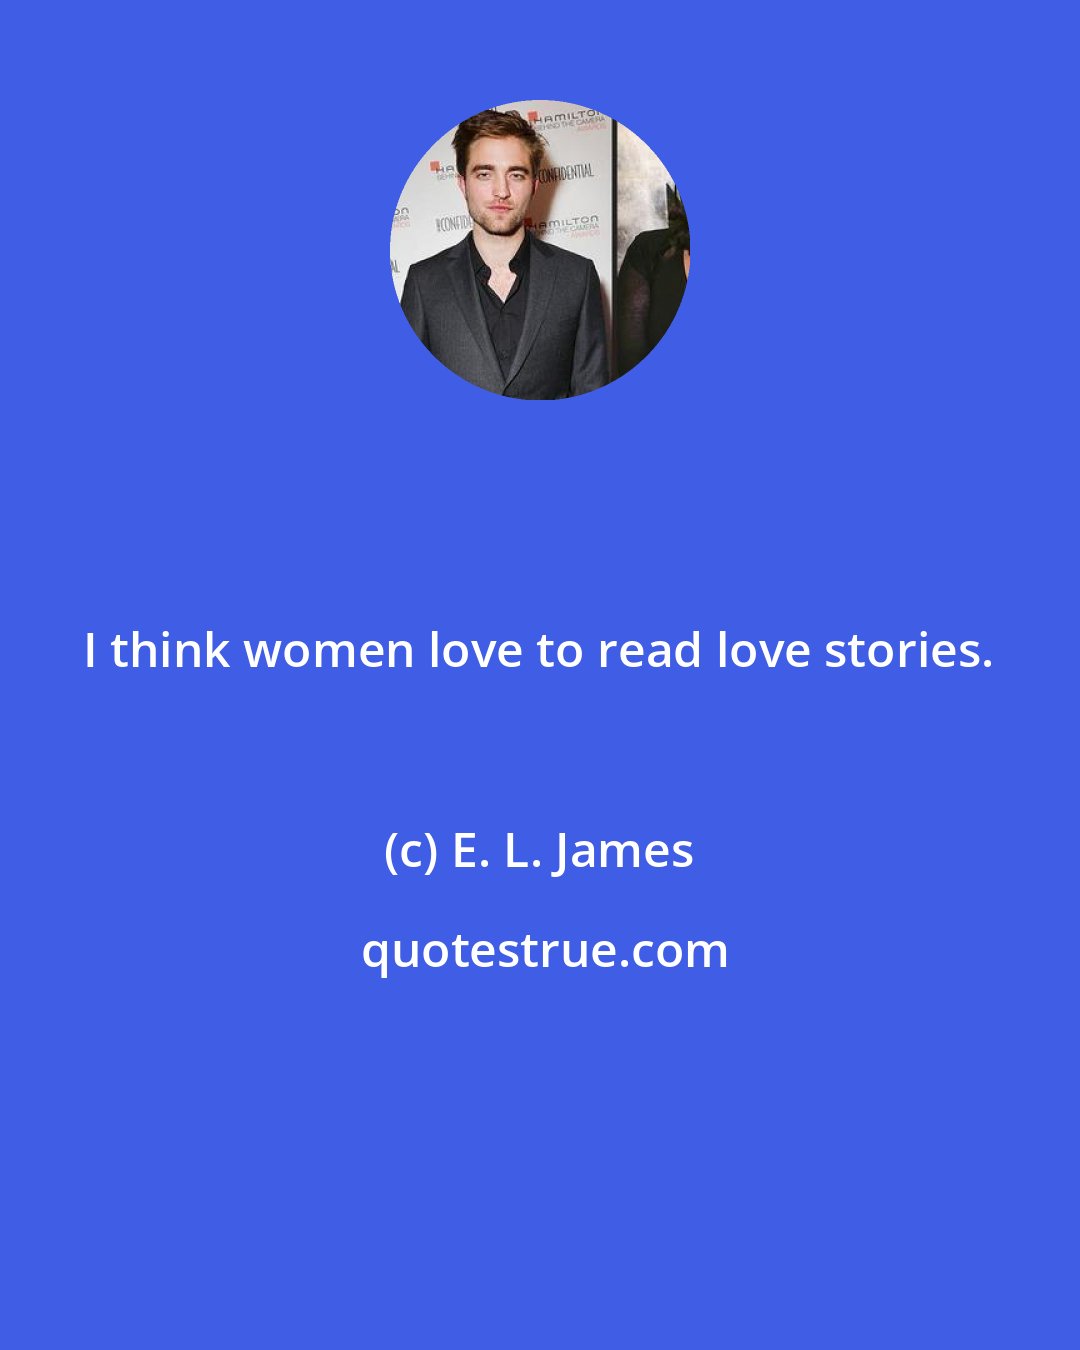 E. L. James: I think women love to read love stories.